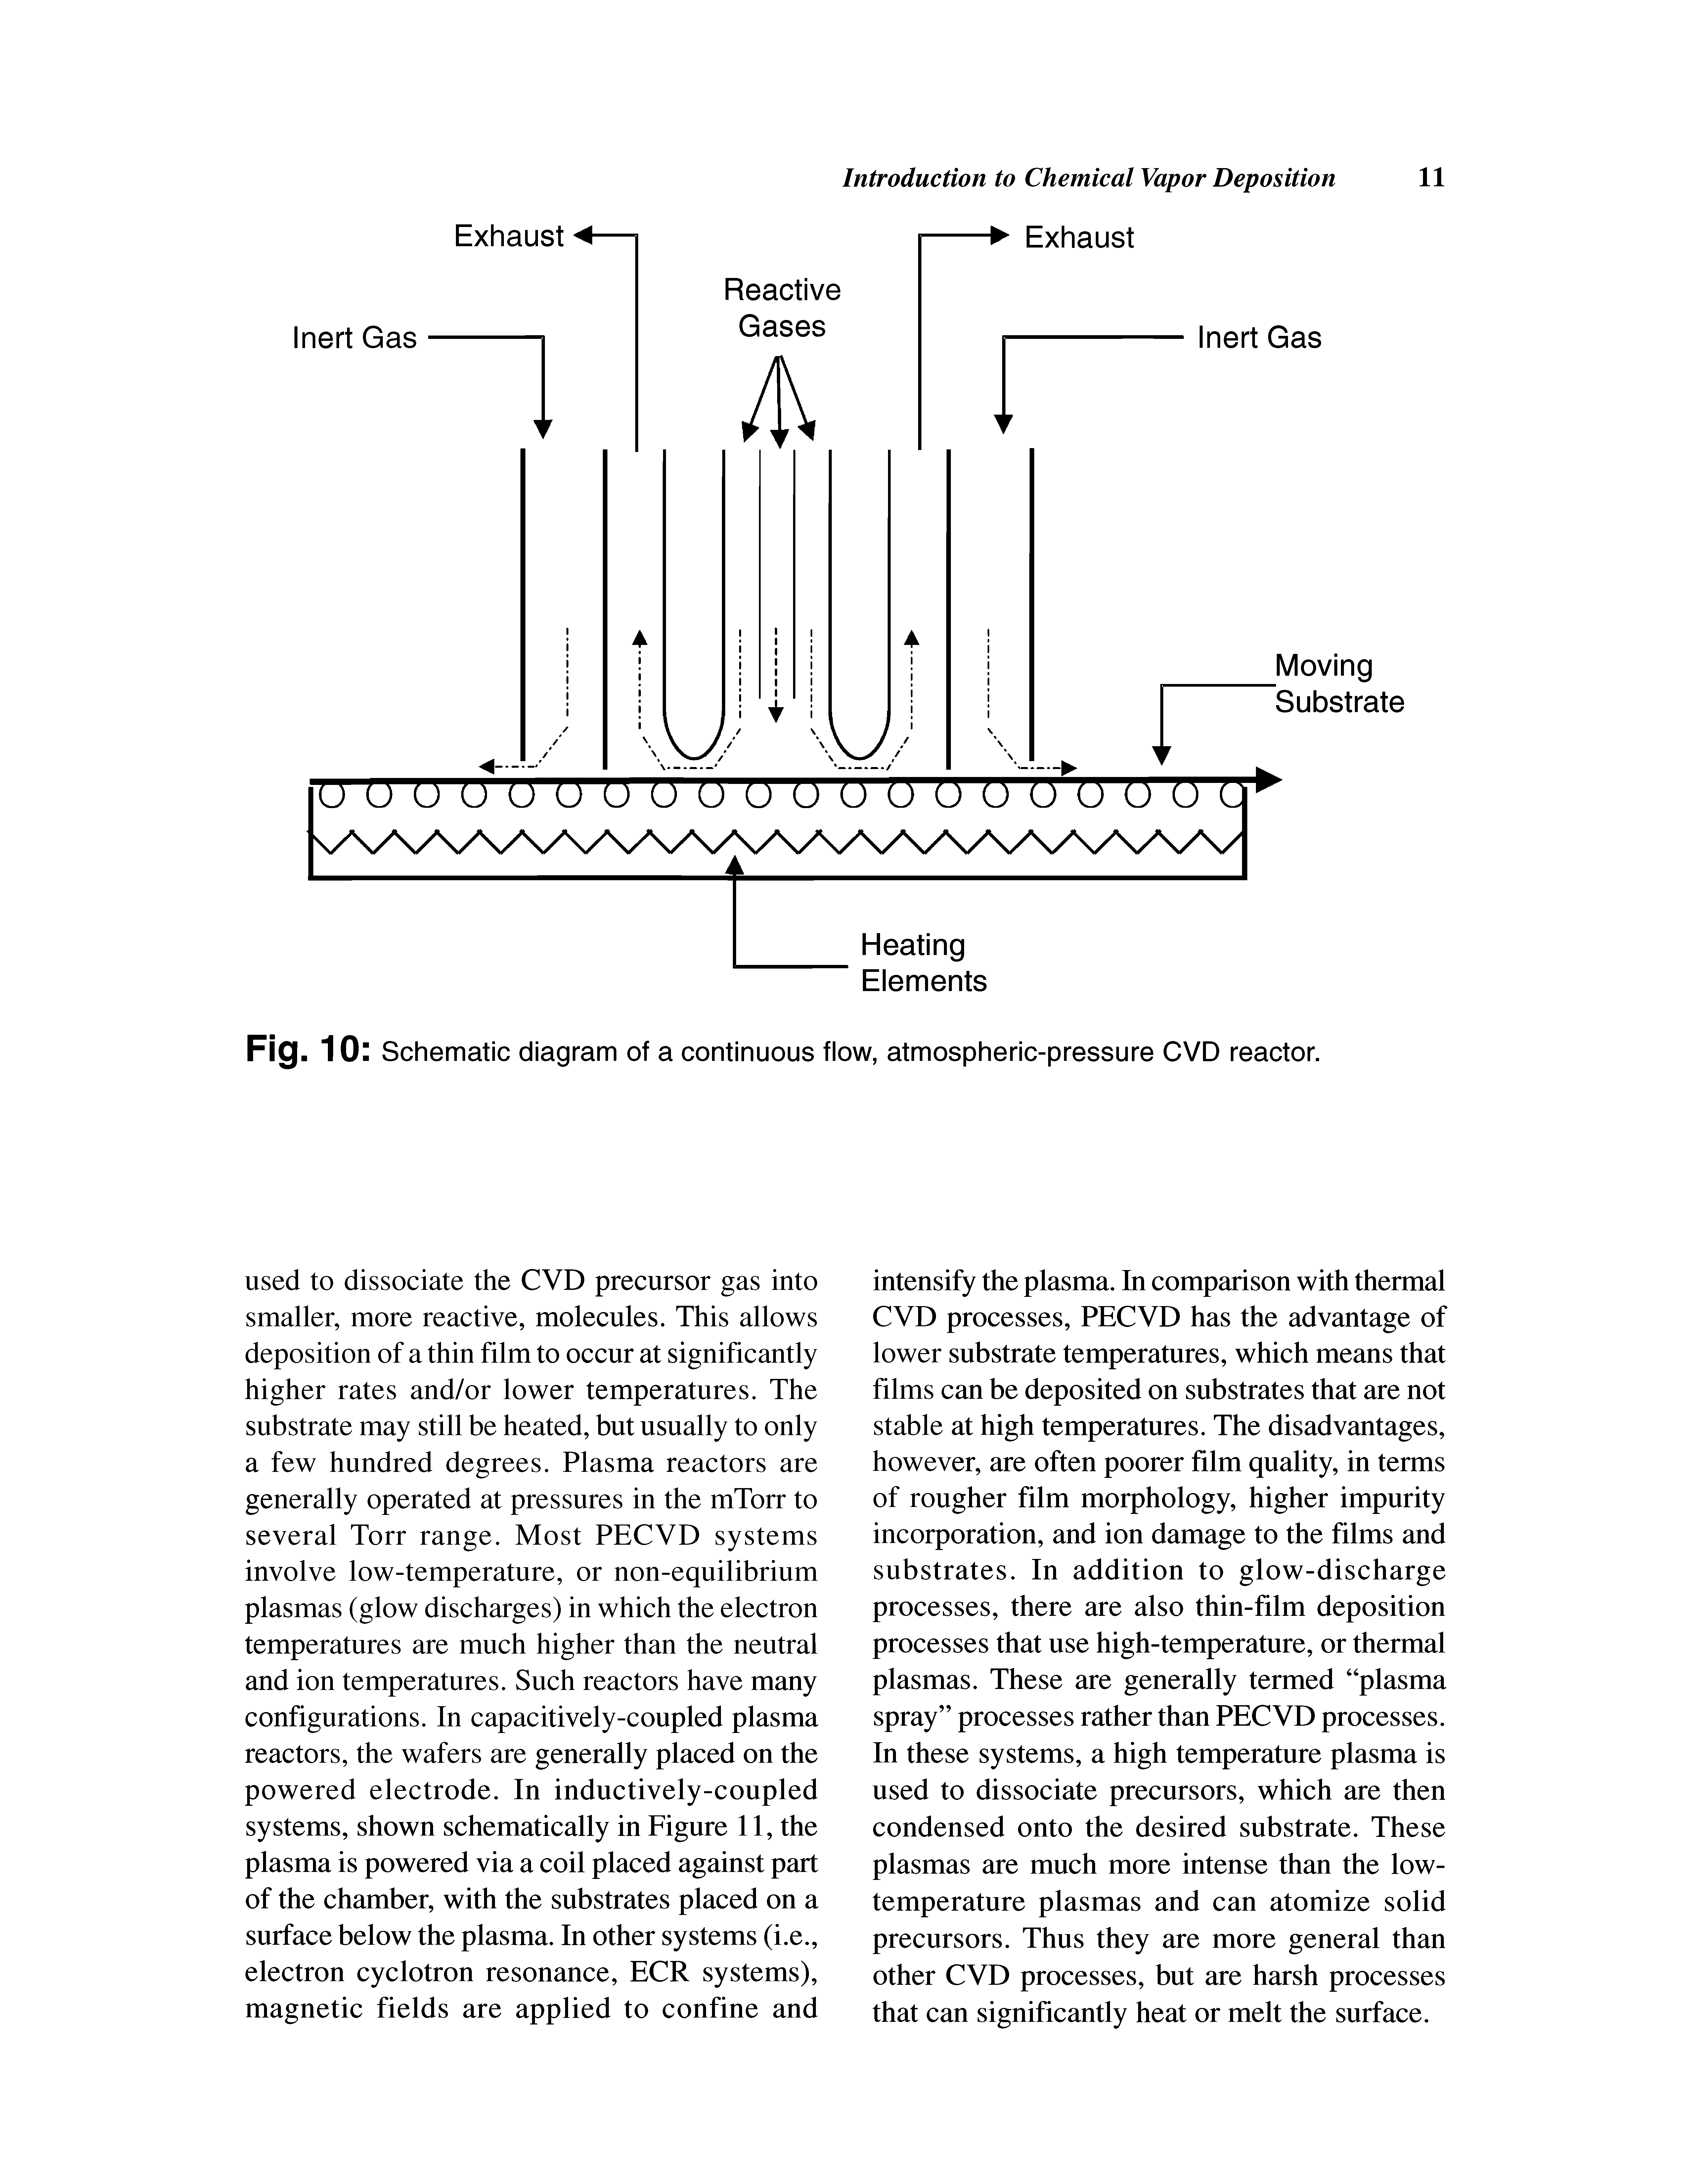 Fig. 10 Schematic diagram of a continuous flow, atmospheric-pressure CVD reactor.